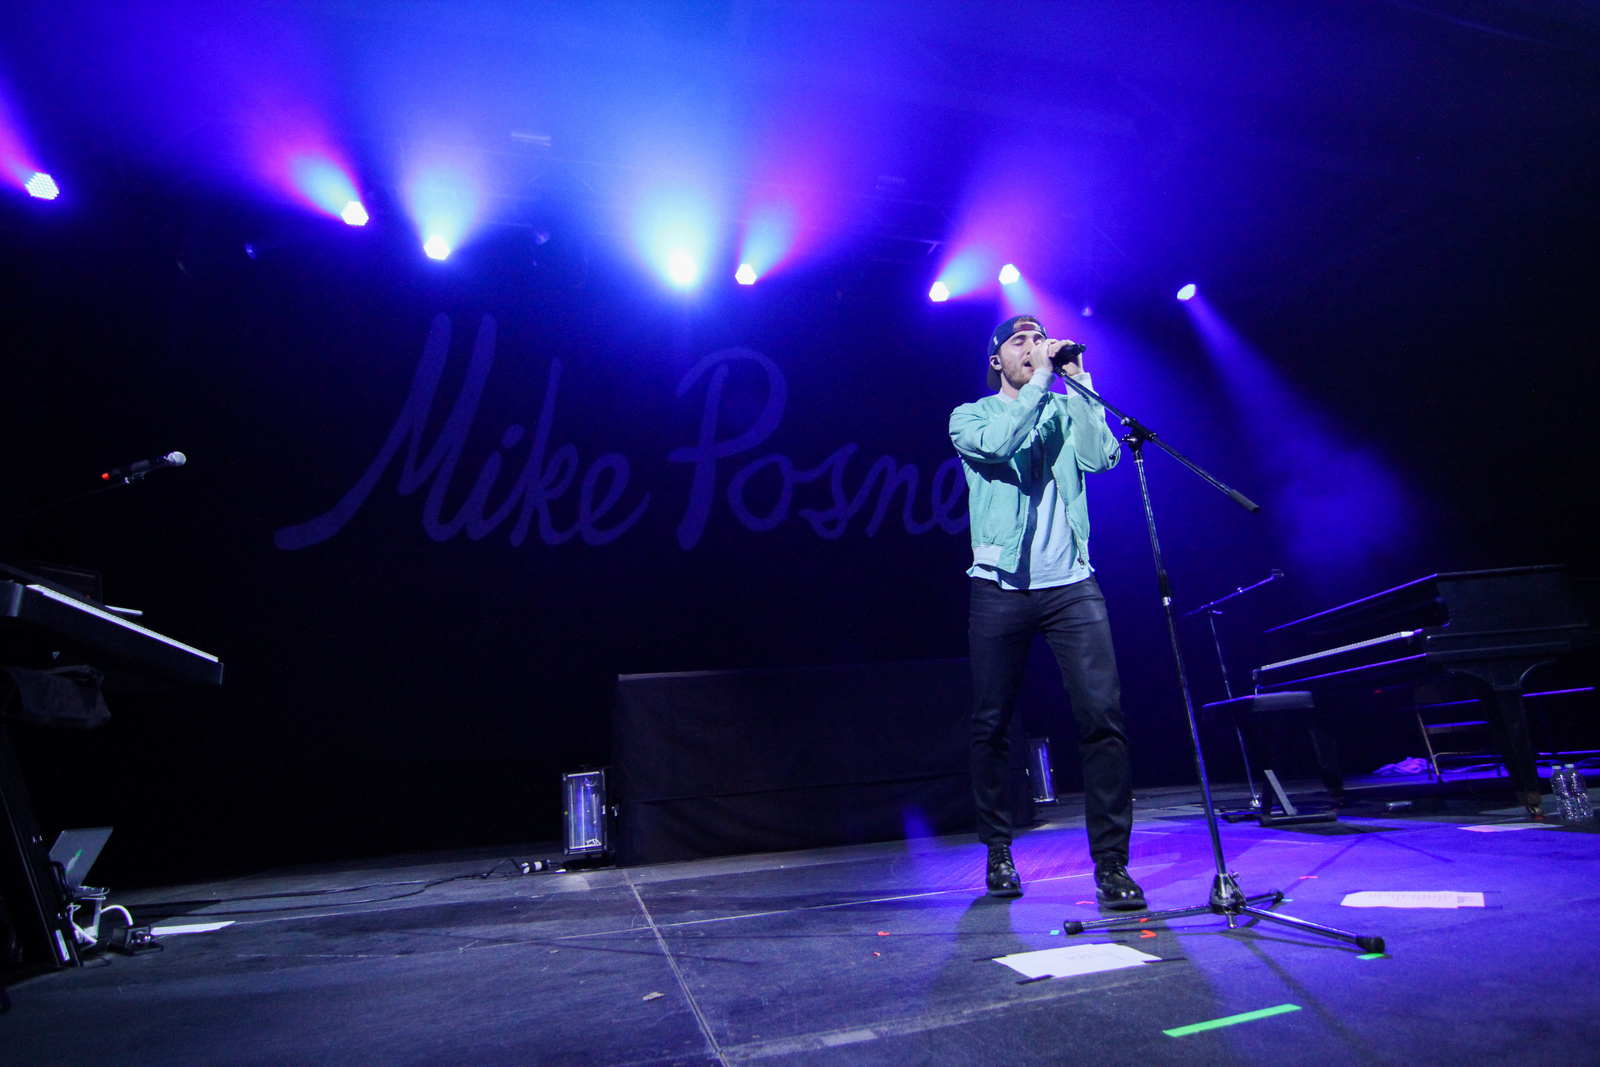 Mike Posner performaing at Albion College's Big Show 2014 in Albion, MI 4/21/14
Photo by Albion College
